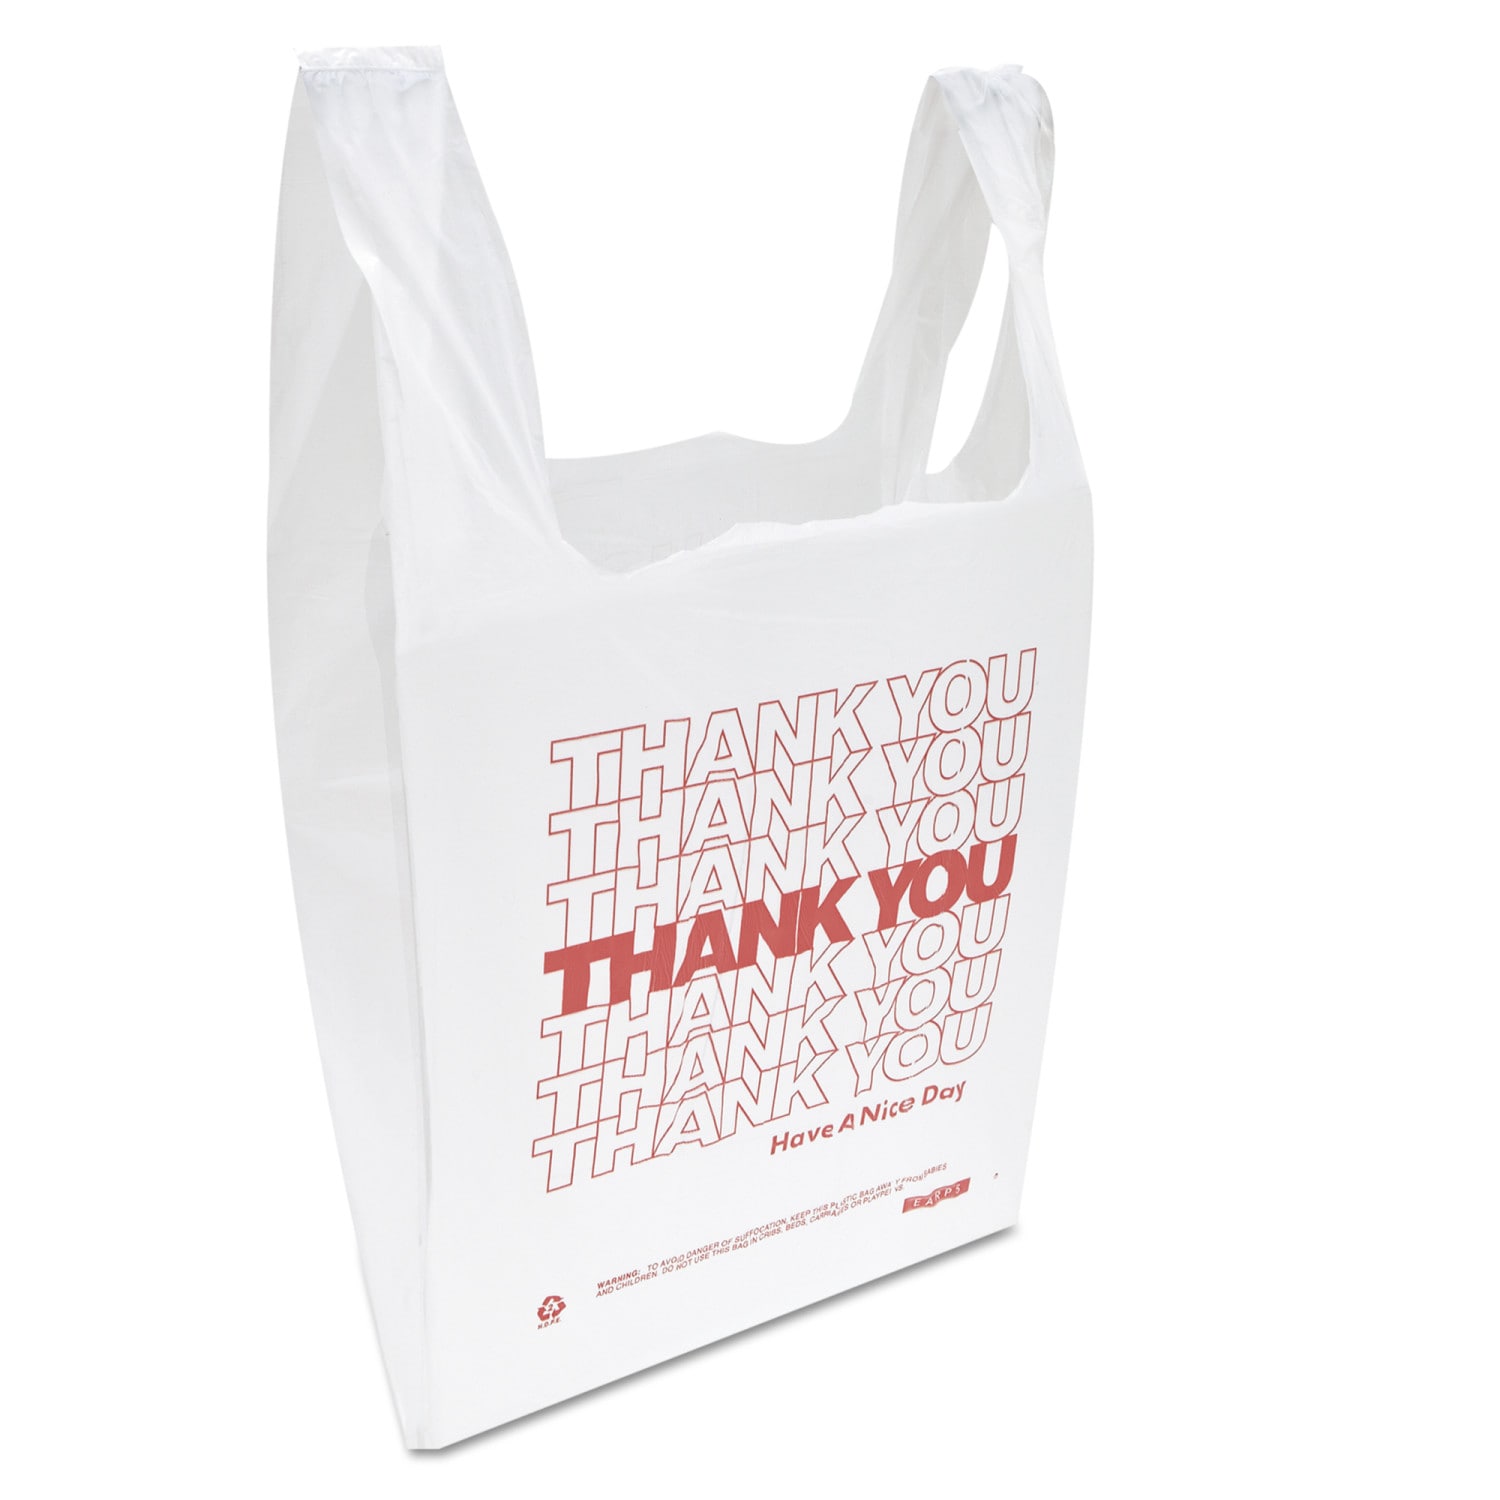 Amazon.com: Muellery White Plain Plastic Bags 200 Pieces For Merchandise  Retail Grocery Bags 7.7 x 12.8 inch : Muellery: Industrial & Scientific